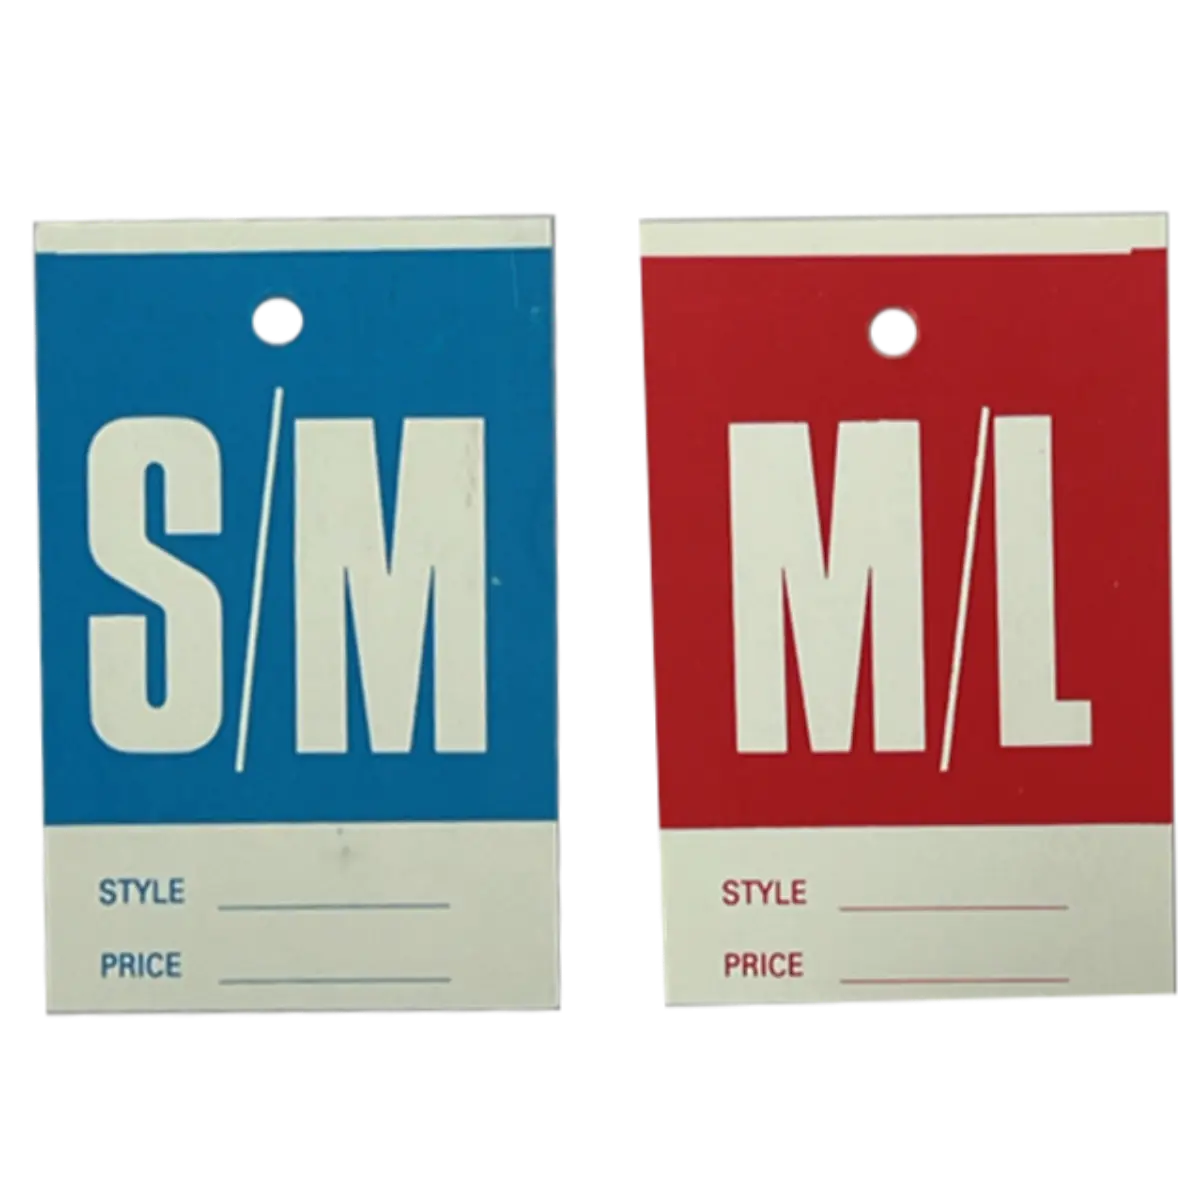 Colour-Coded Size, Style And Price Labels - S/M M/L